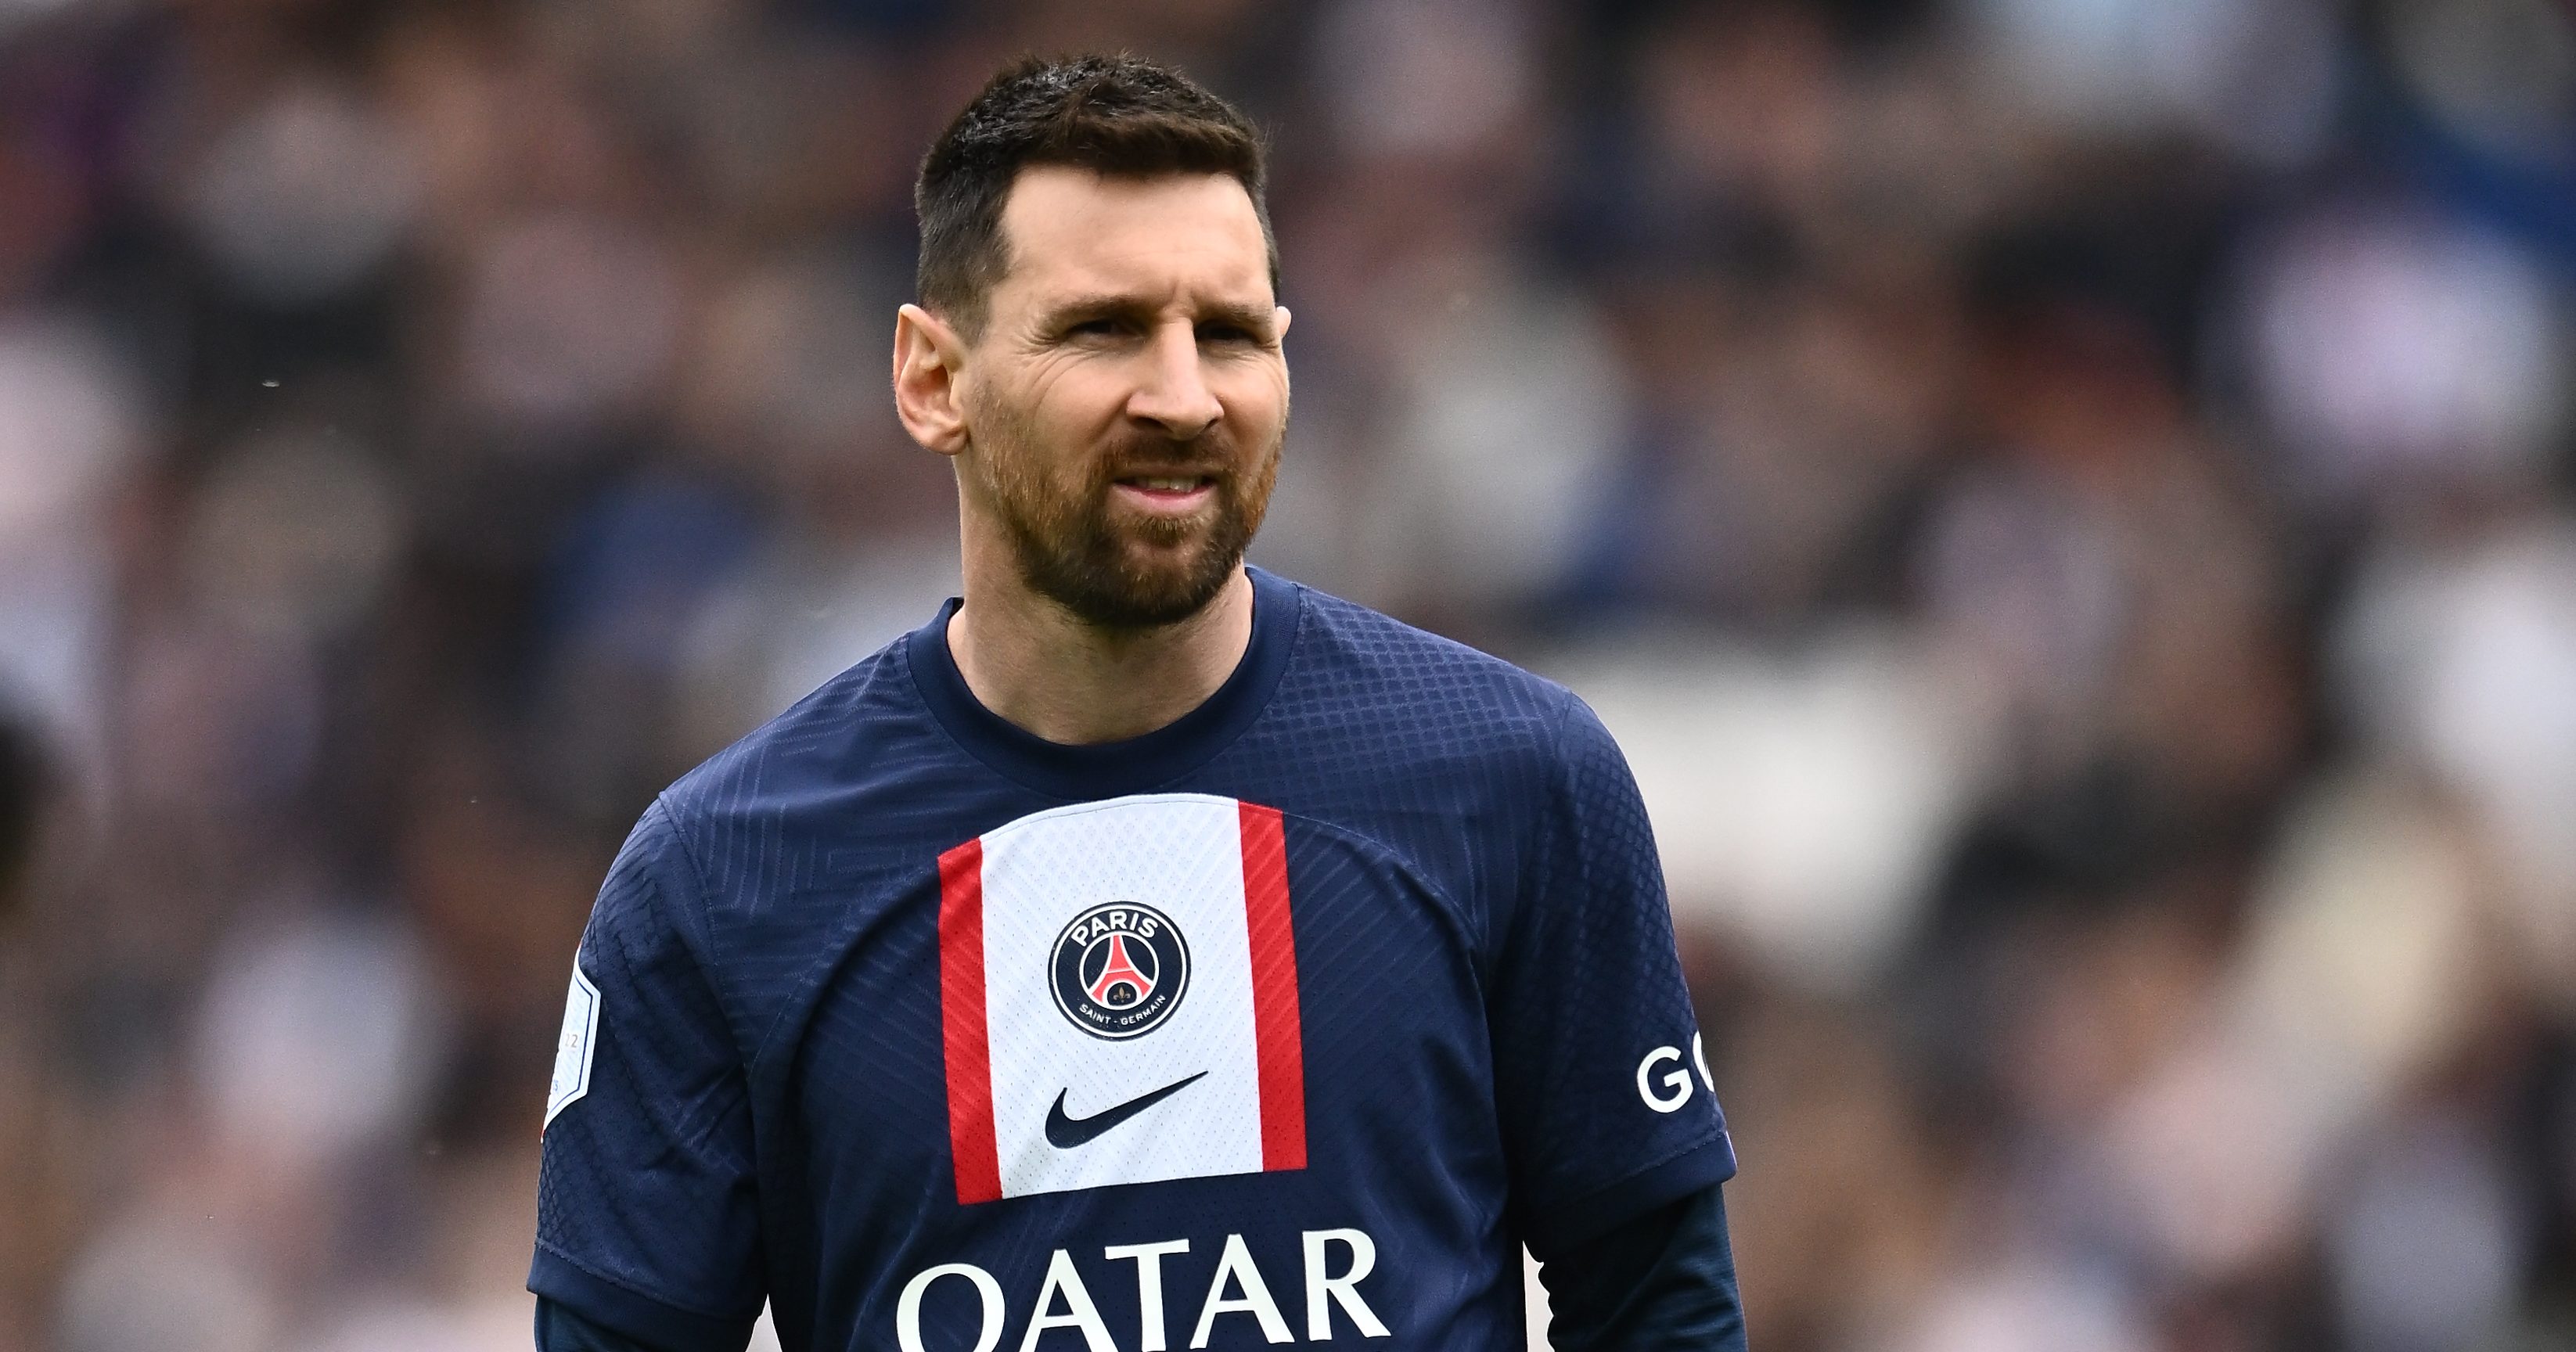 PSG 'want Cristiano Ronaldo transfer to link up with Lionel Messi